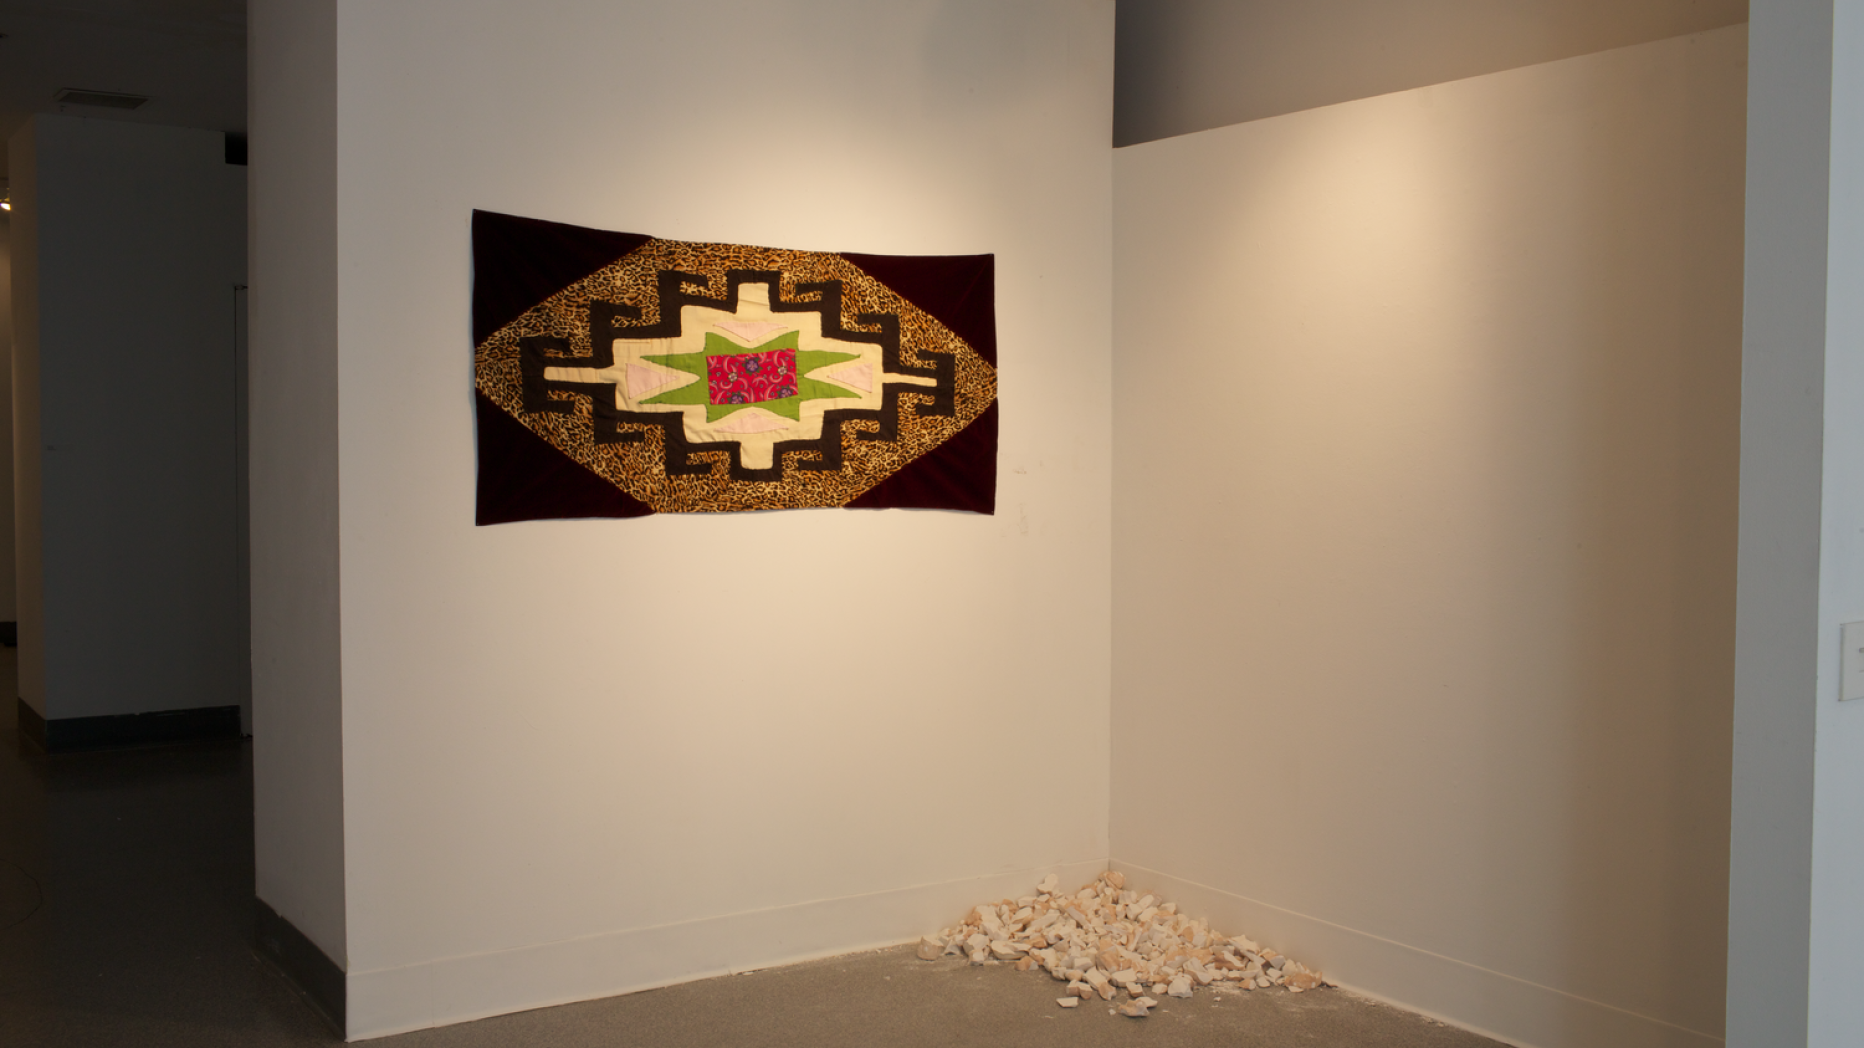 A gallery space with a patterned quilt on the wall and a pile of crumbled material in the corner.